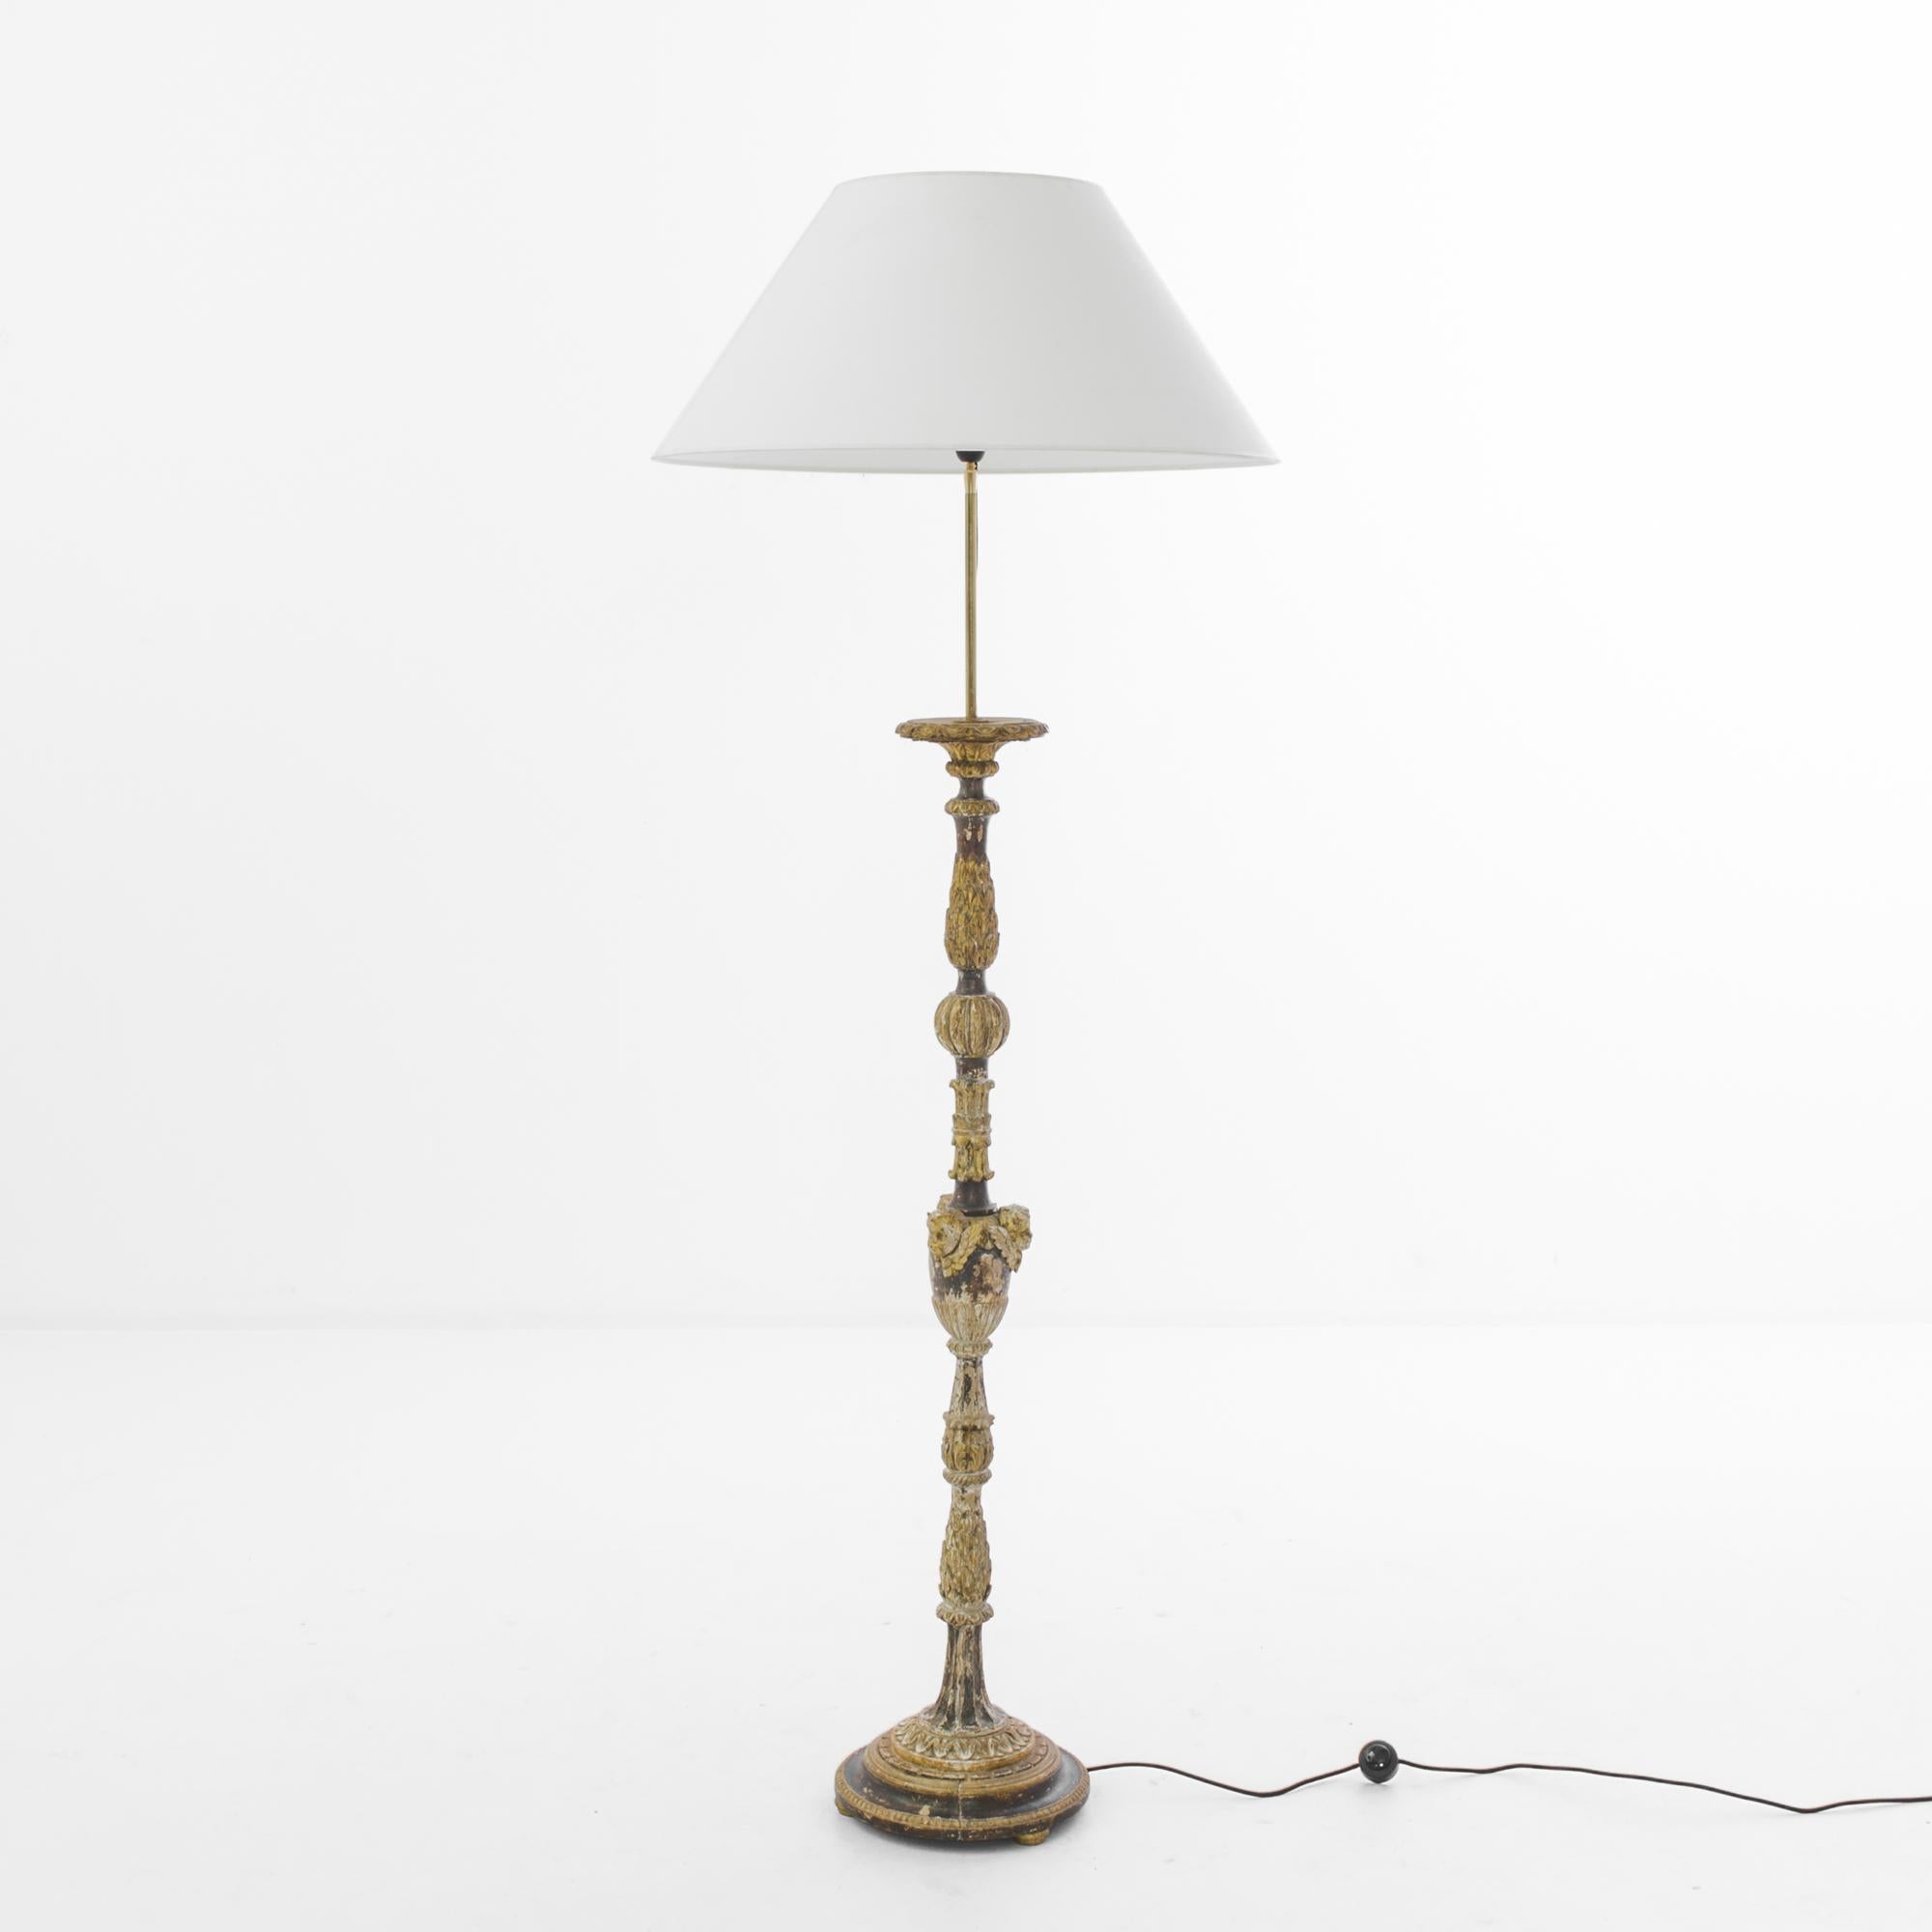 Made in France, circa 1800, this wooden floor lamp lends an old-world charm with the ornate carvings, adorned with polychrome color. Carvings of flowers and leaves impart a neoclassical touch. The white empire lampshade, supported by a slender brass